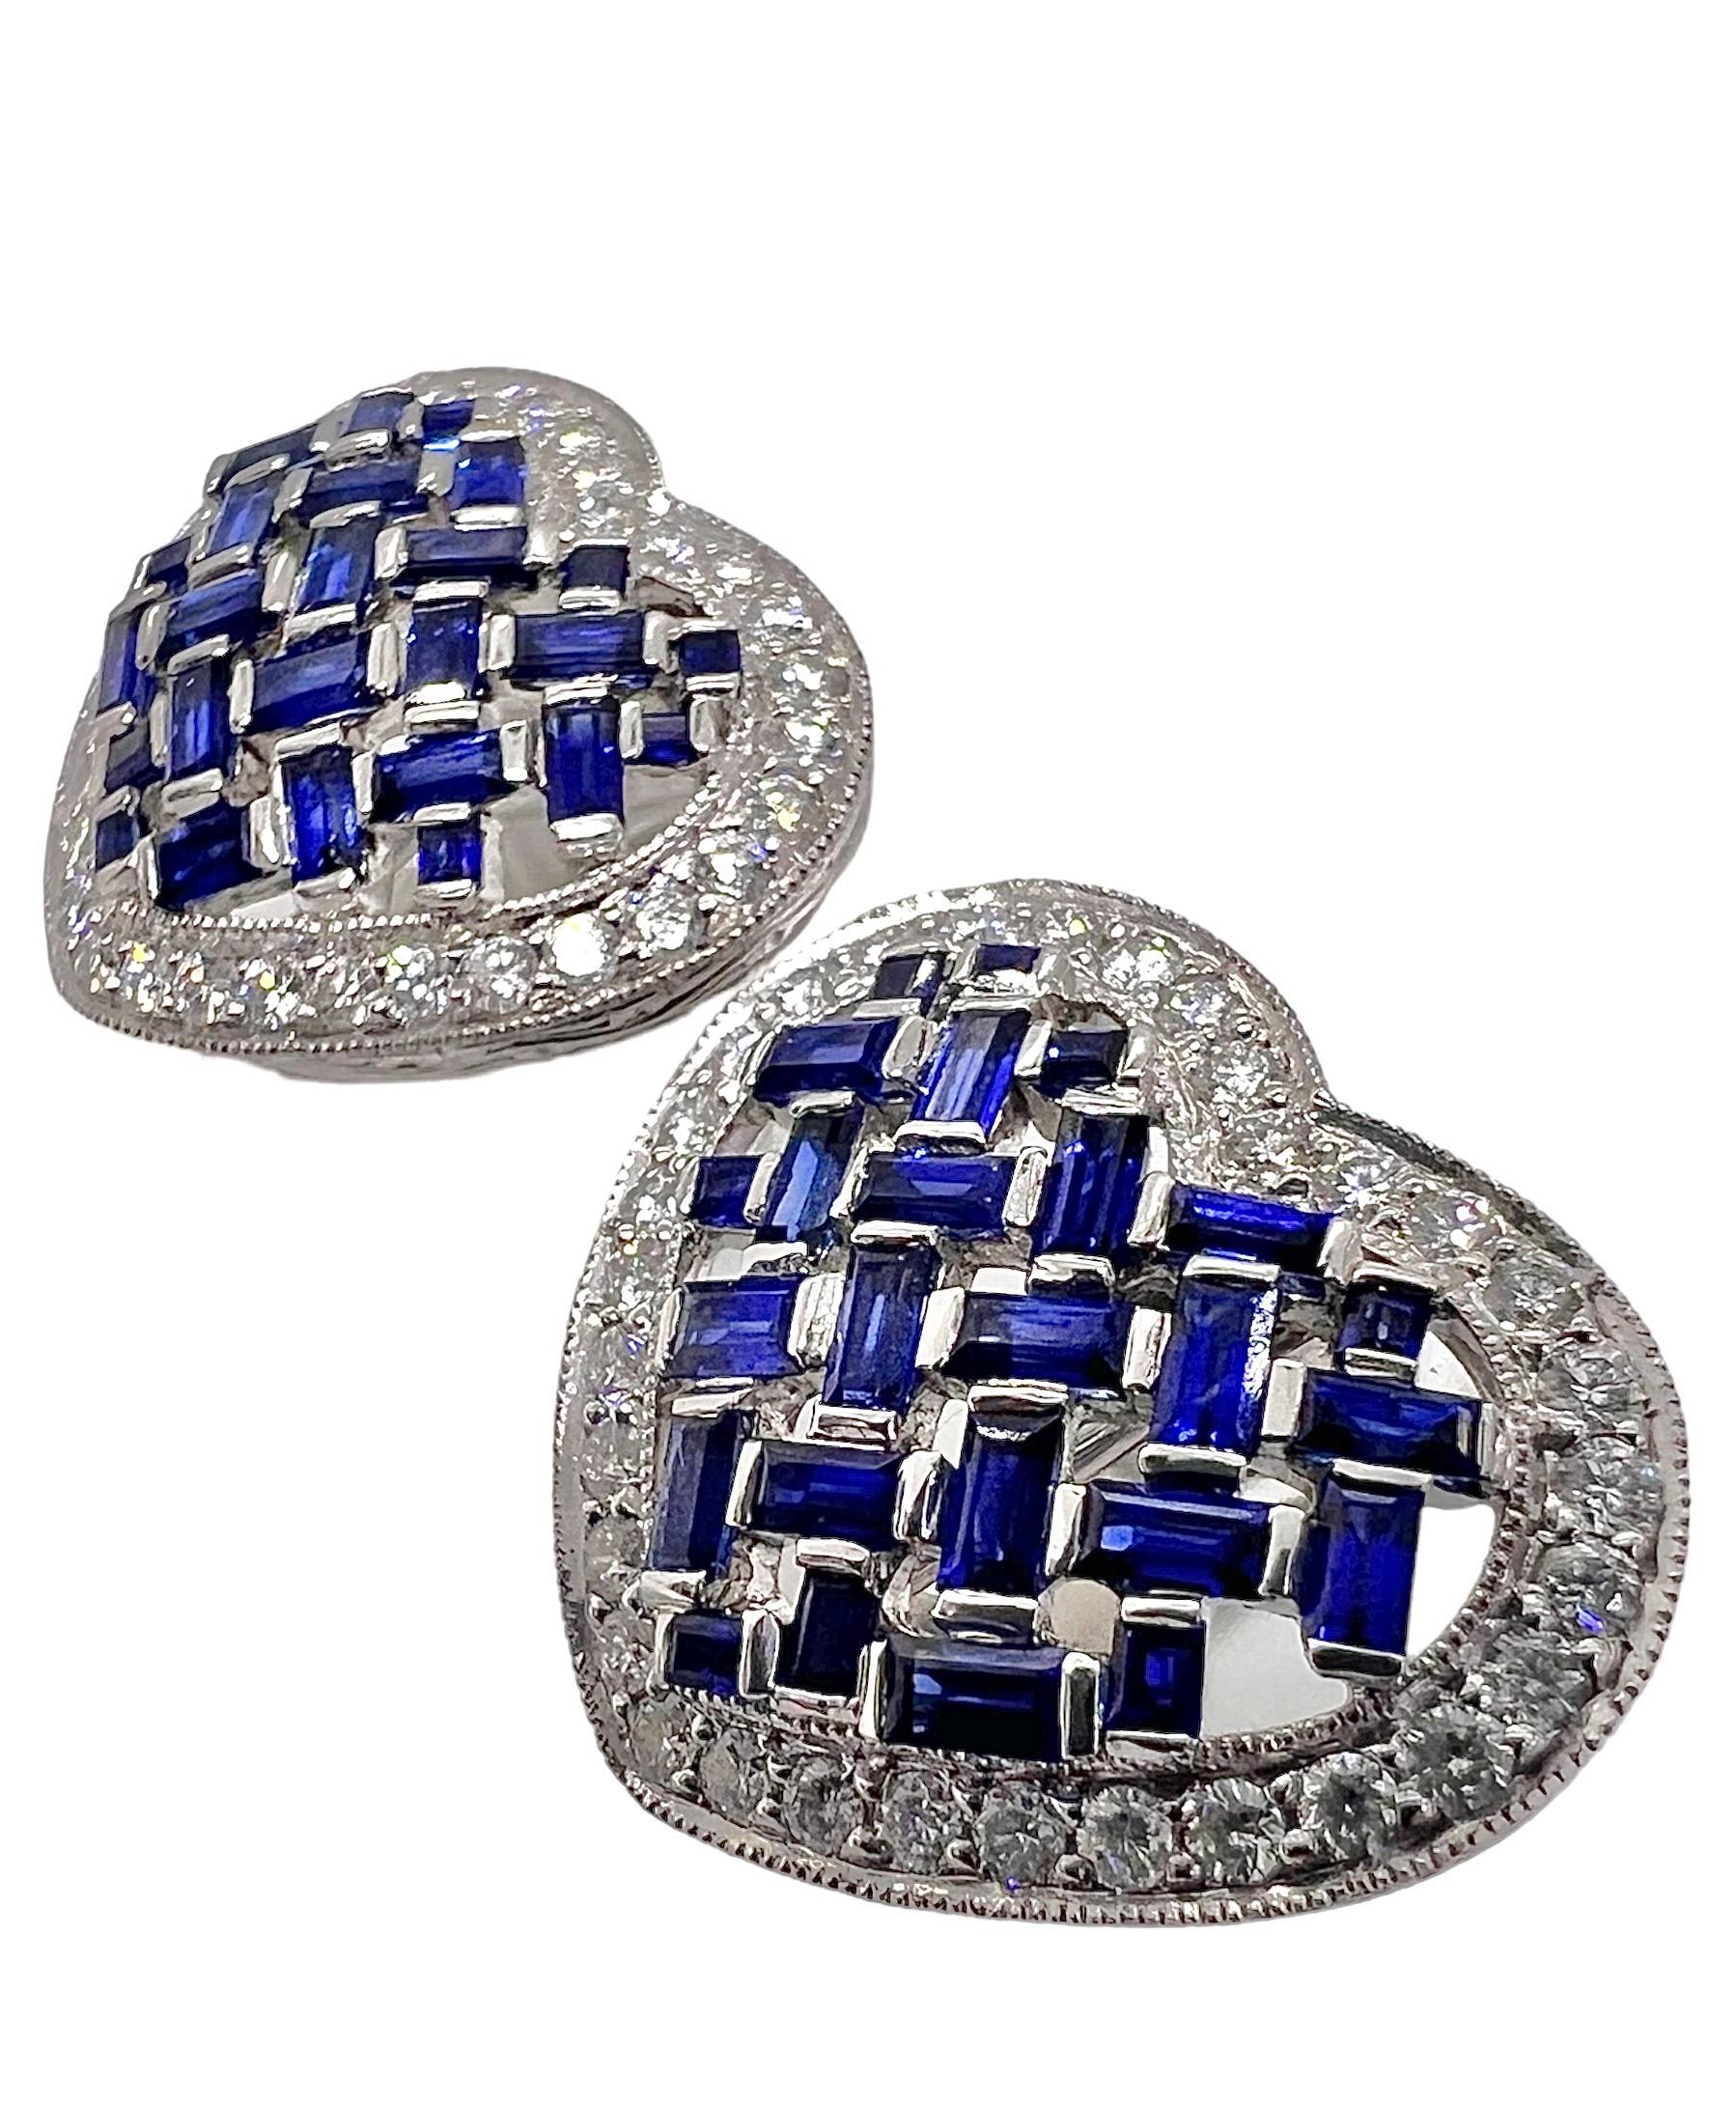 Heart shaped earrings set in platinum with 1.15 carats diamonds and 2.69 carats blue sapphire. 

Sophia D by Joseph Dardashti LTD has been known worldwide for 35 years and are inspired by classic Art Deco design that merges with modern manufacturing